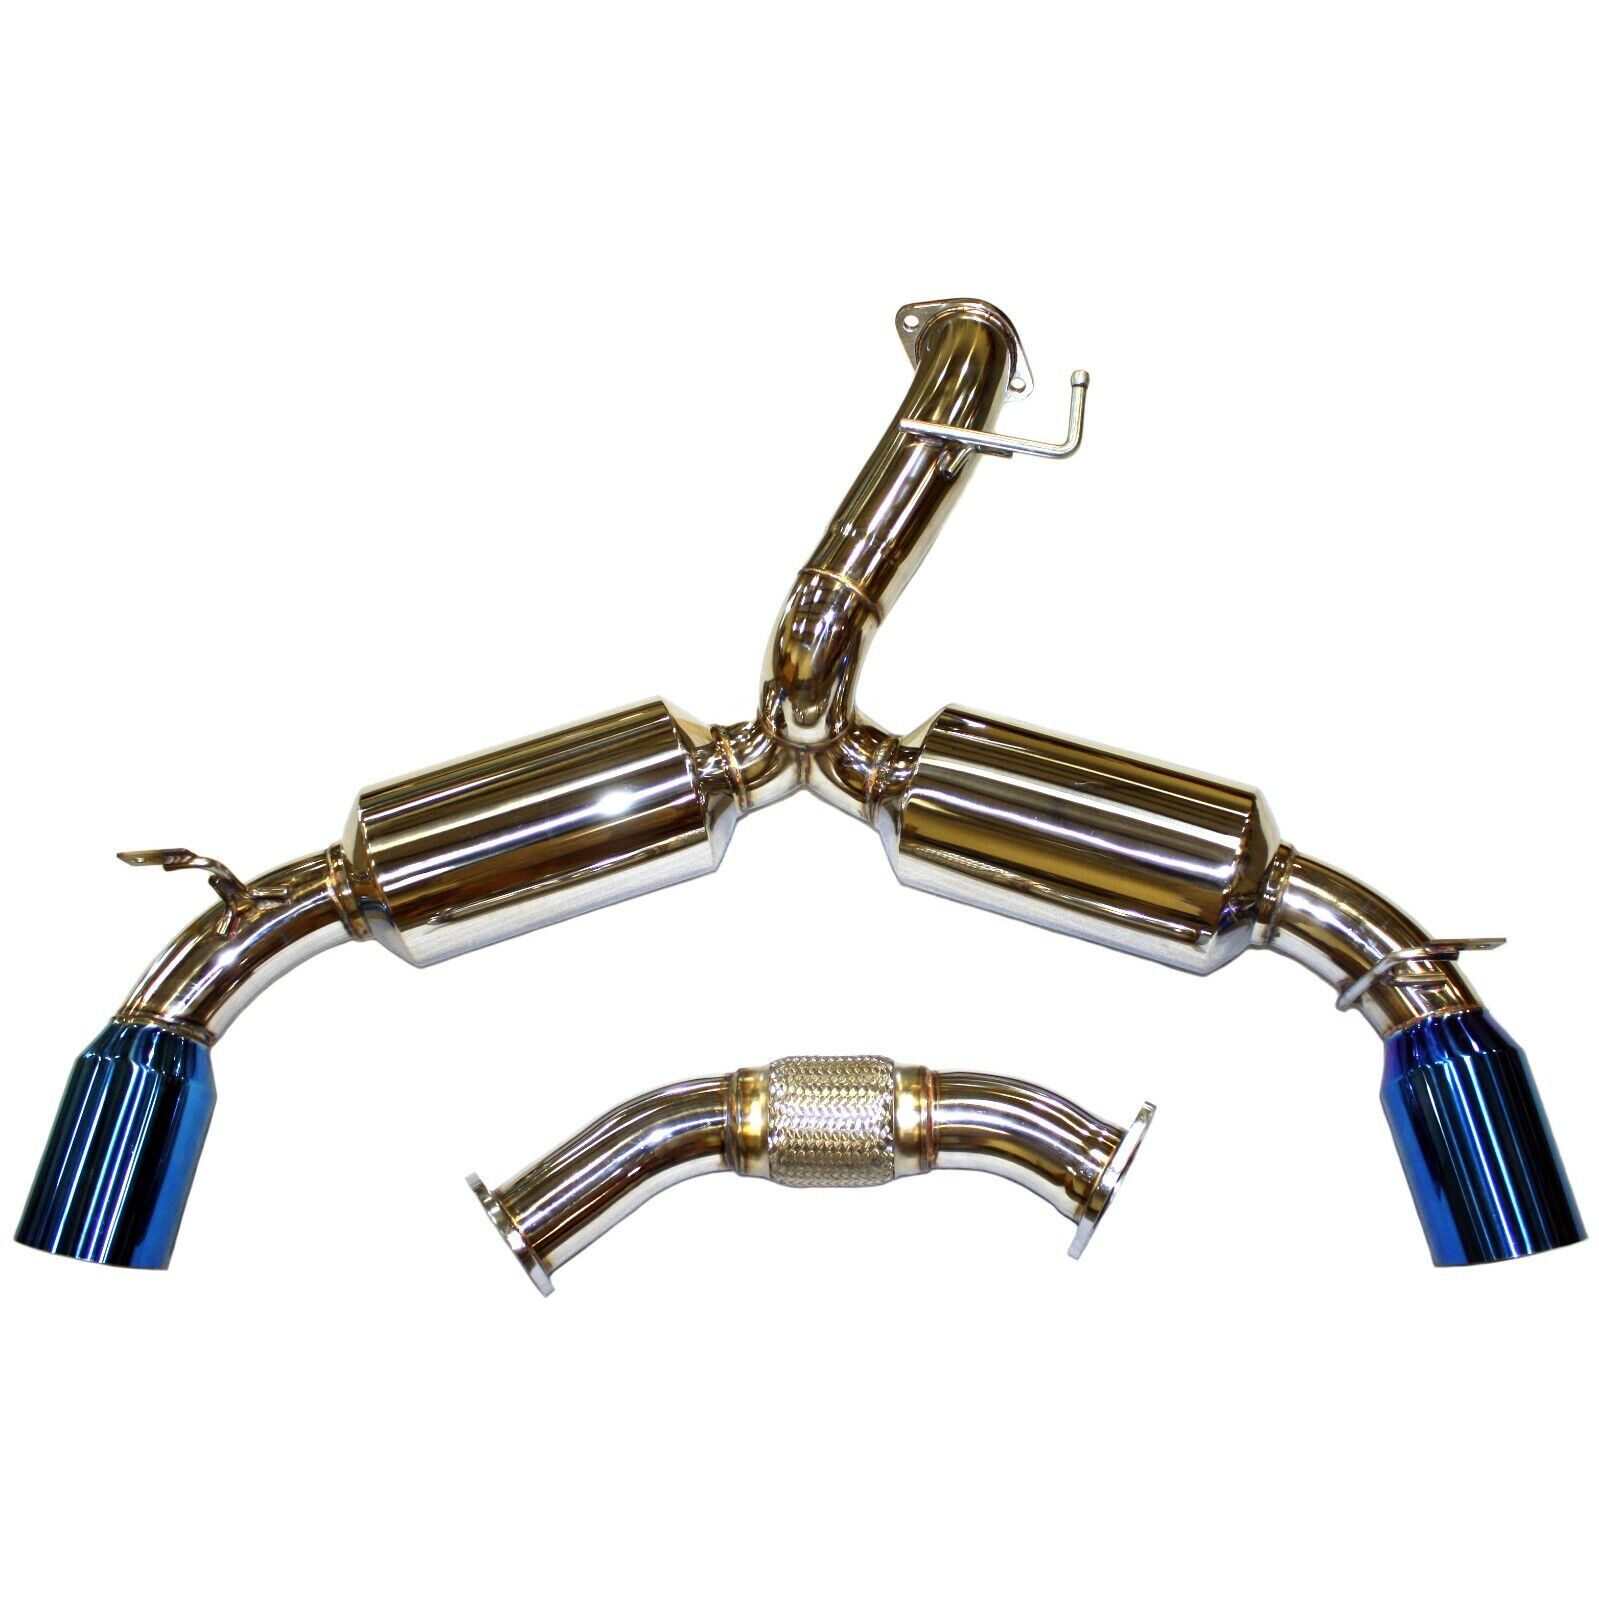 STAINLESS STEEL CATBACK EXHAUST BLUE TI COATED TIPS FOR 90-99 TOYOTA MR2 TURBO